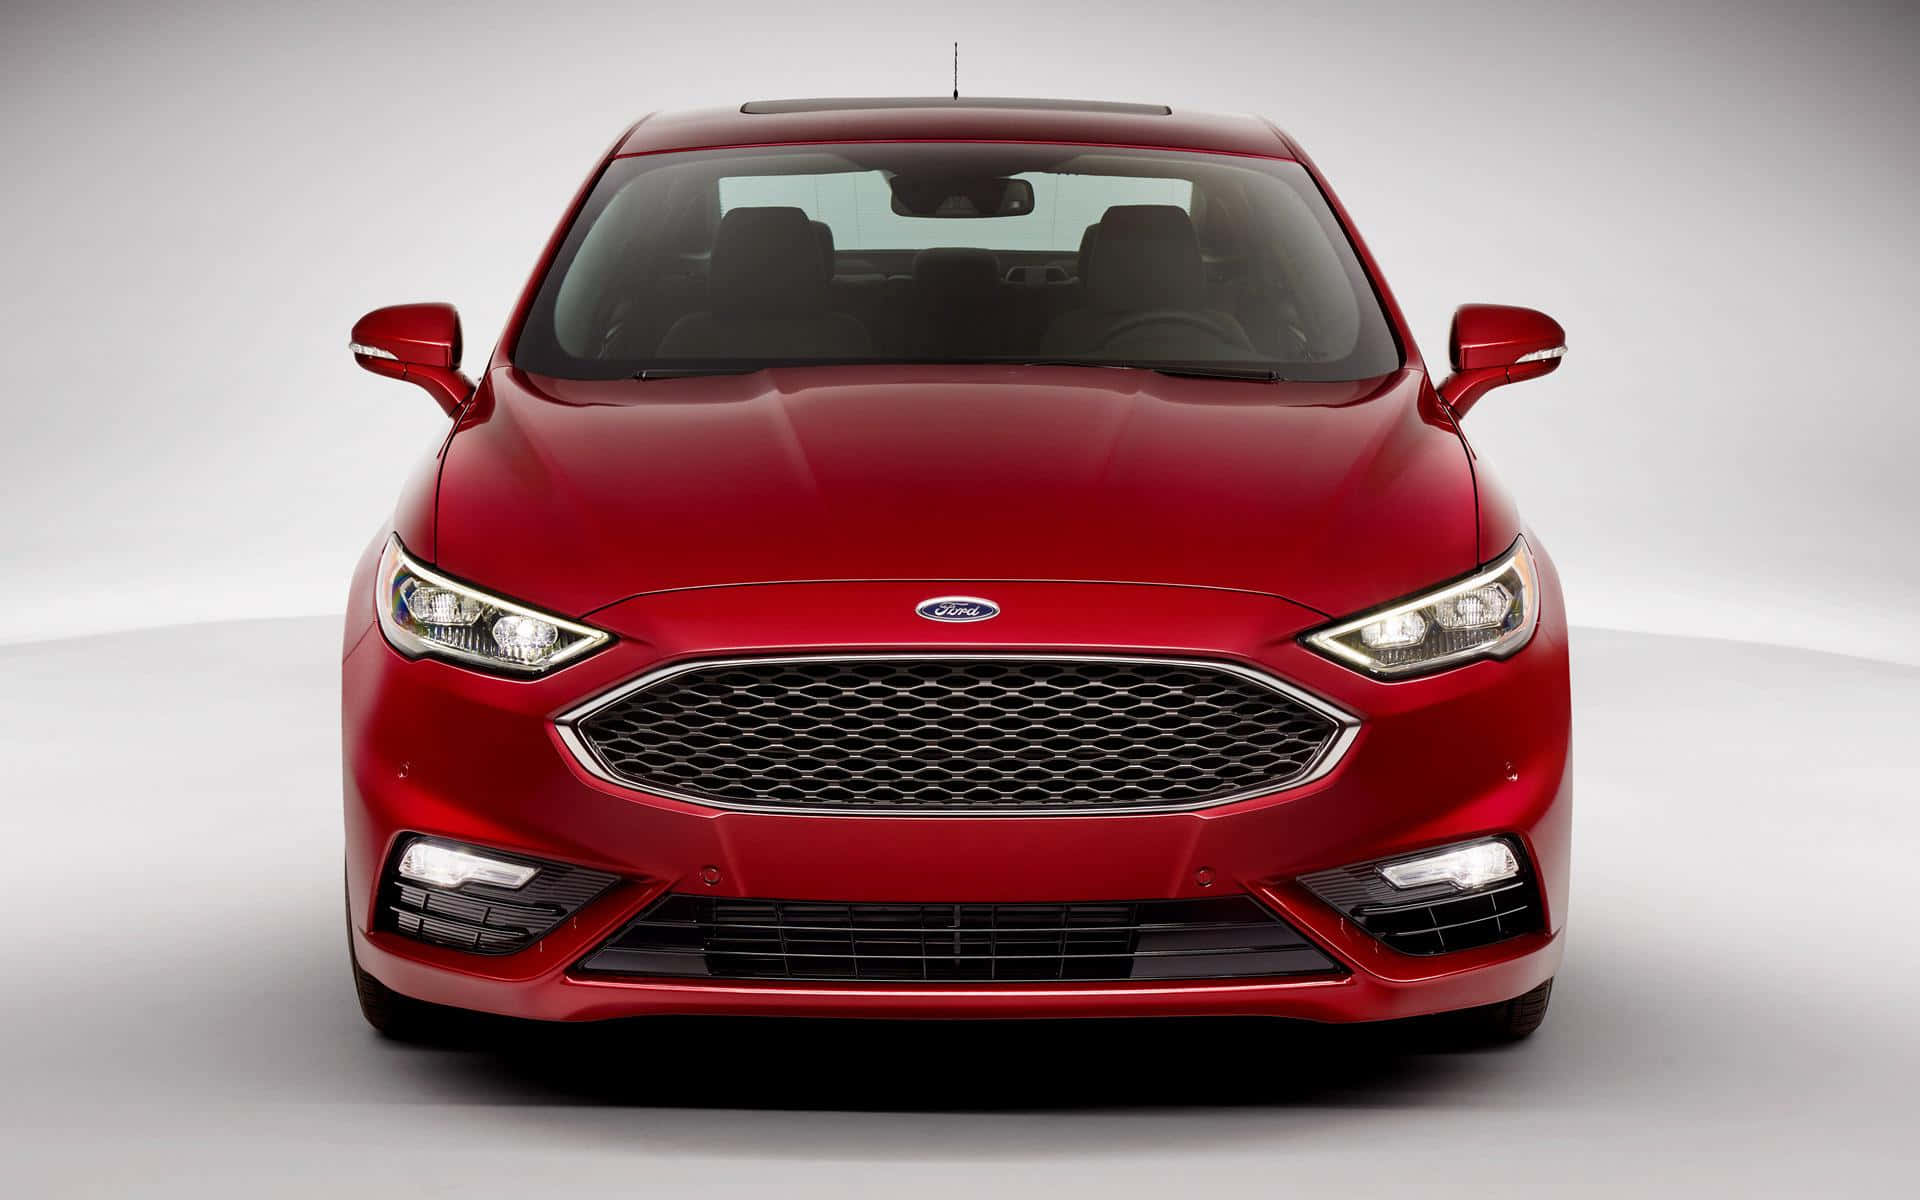 Captivating Ford Fusion in Motion Wallpaper